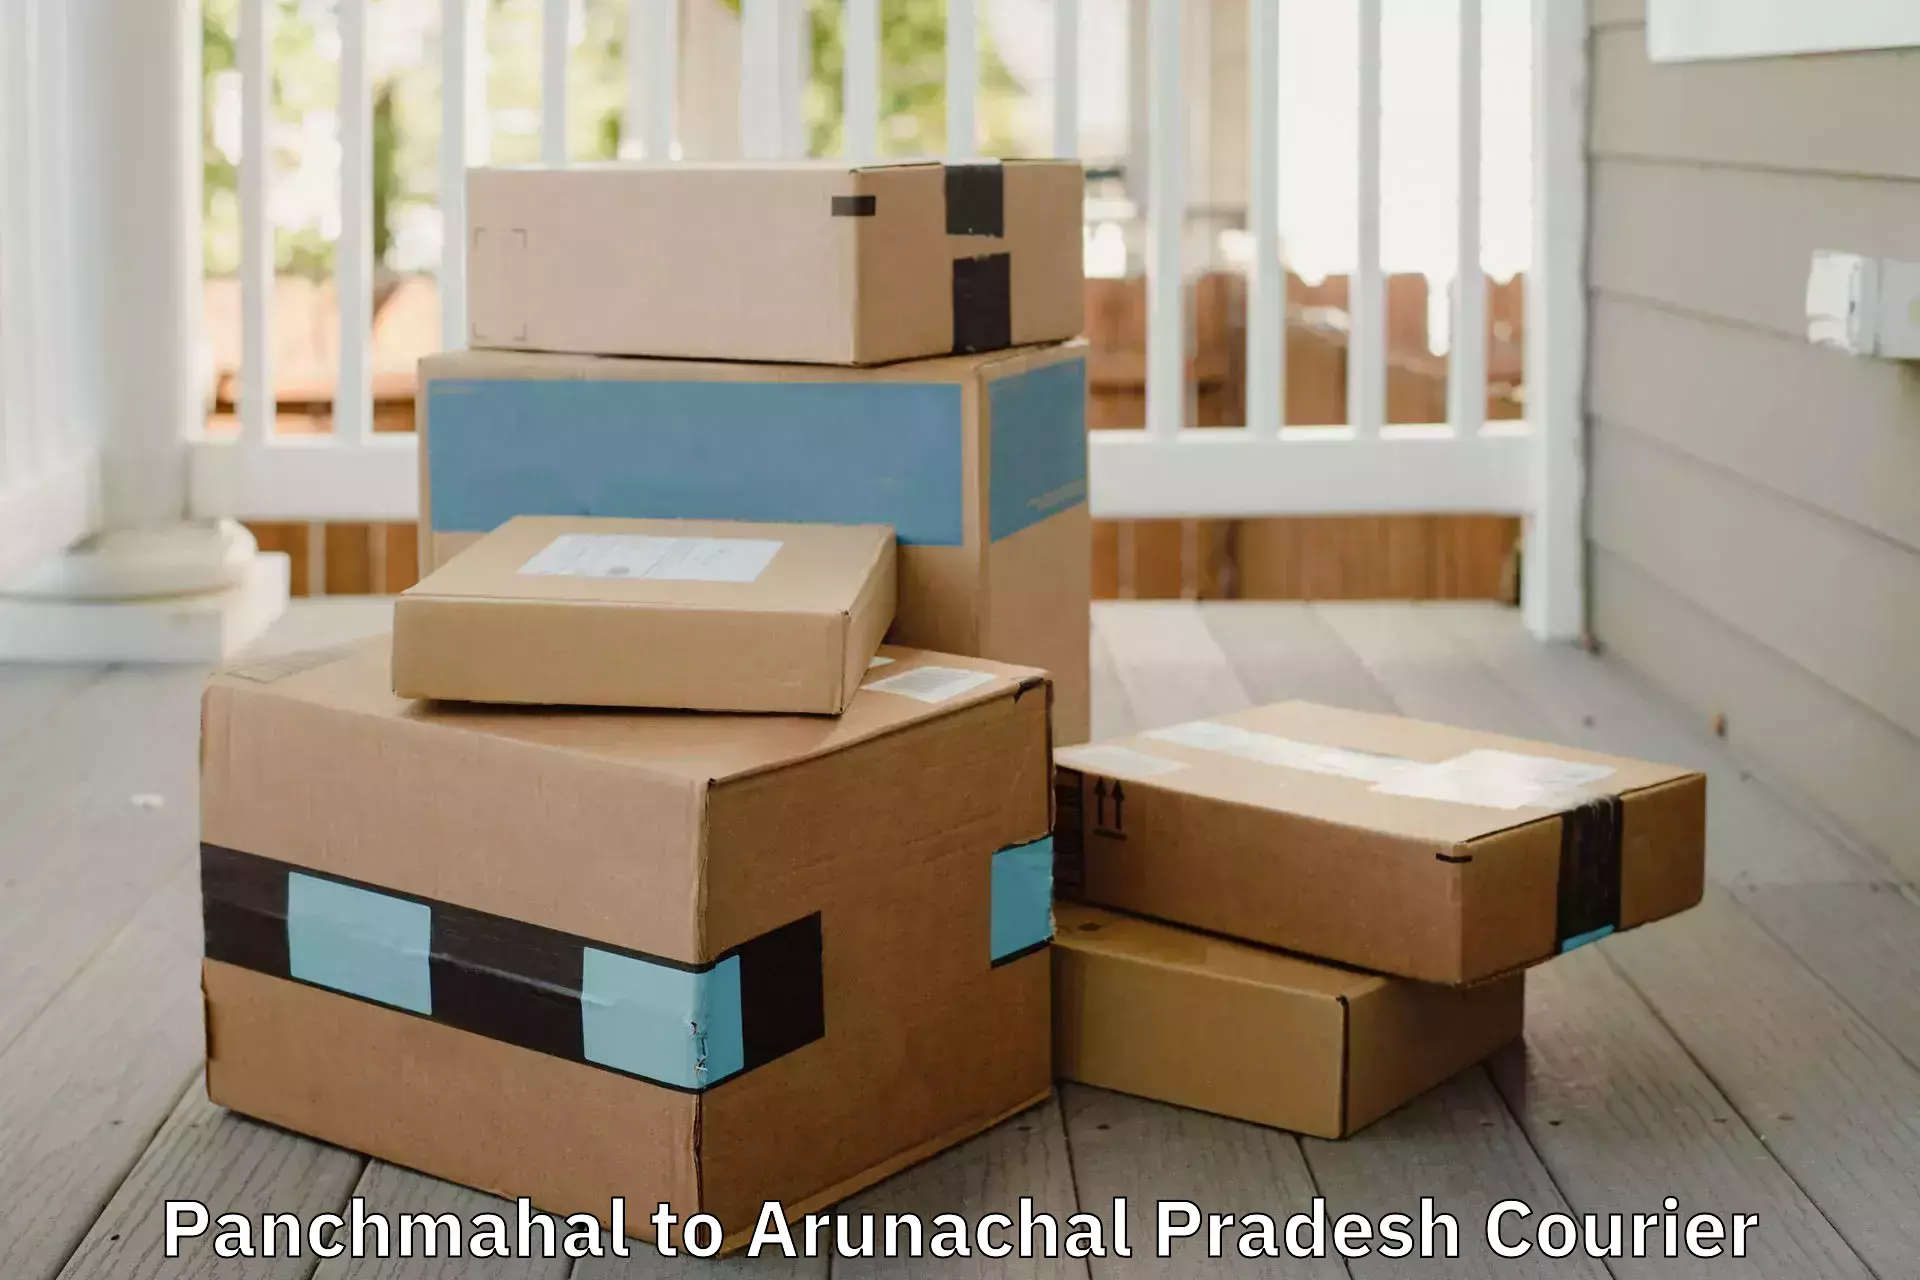 Professional moving company Panchmahal to Deomali